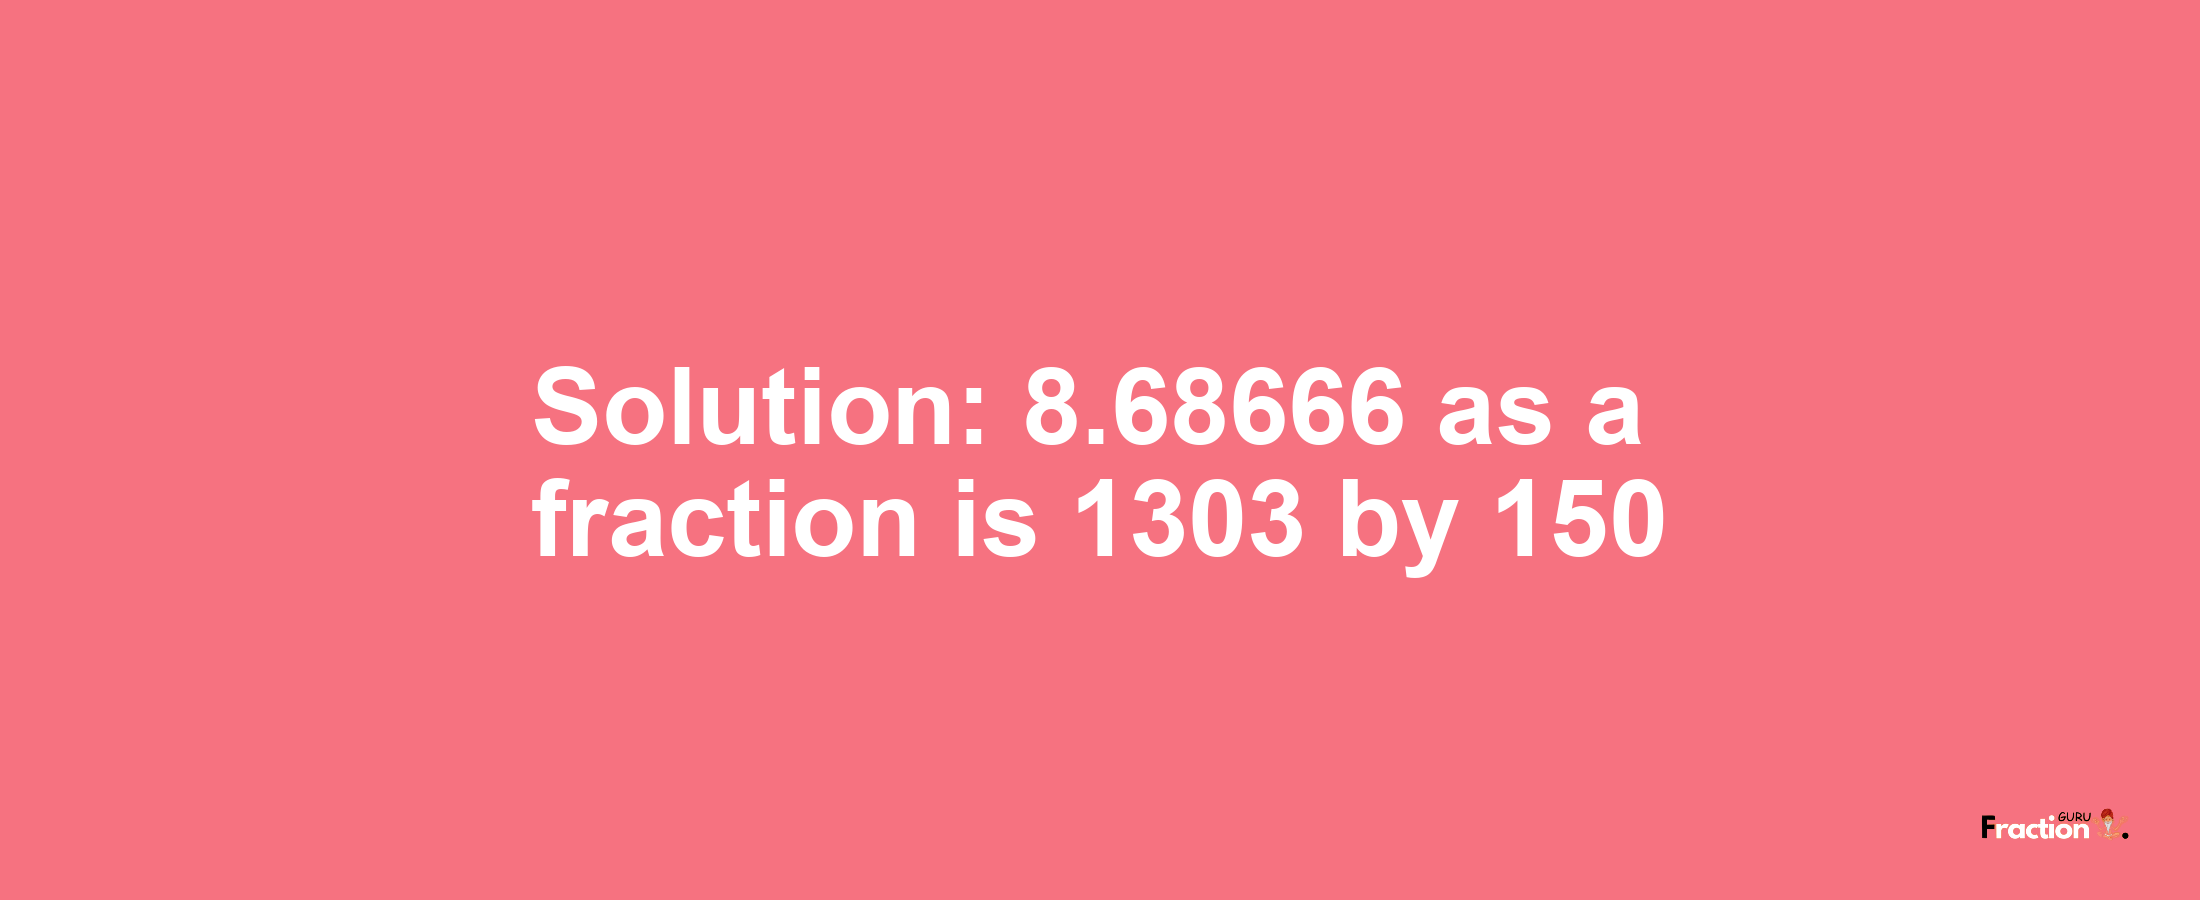 Solution:8.68666 as a fraction is 1303/150